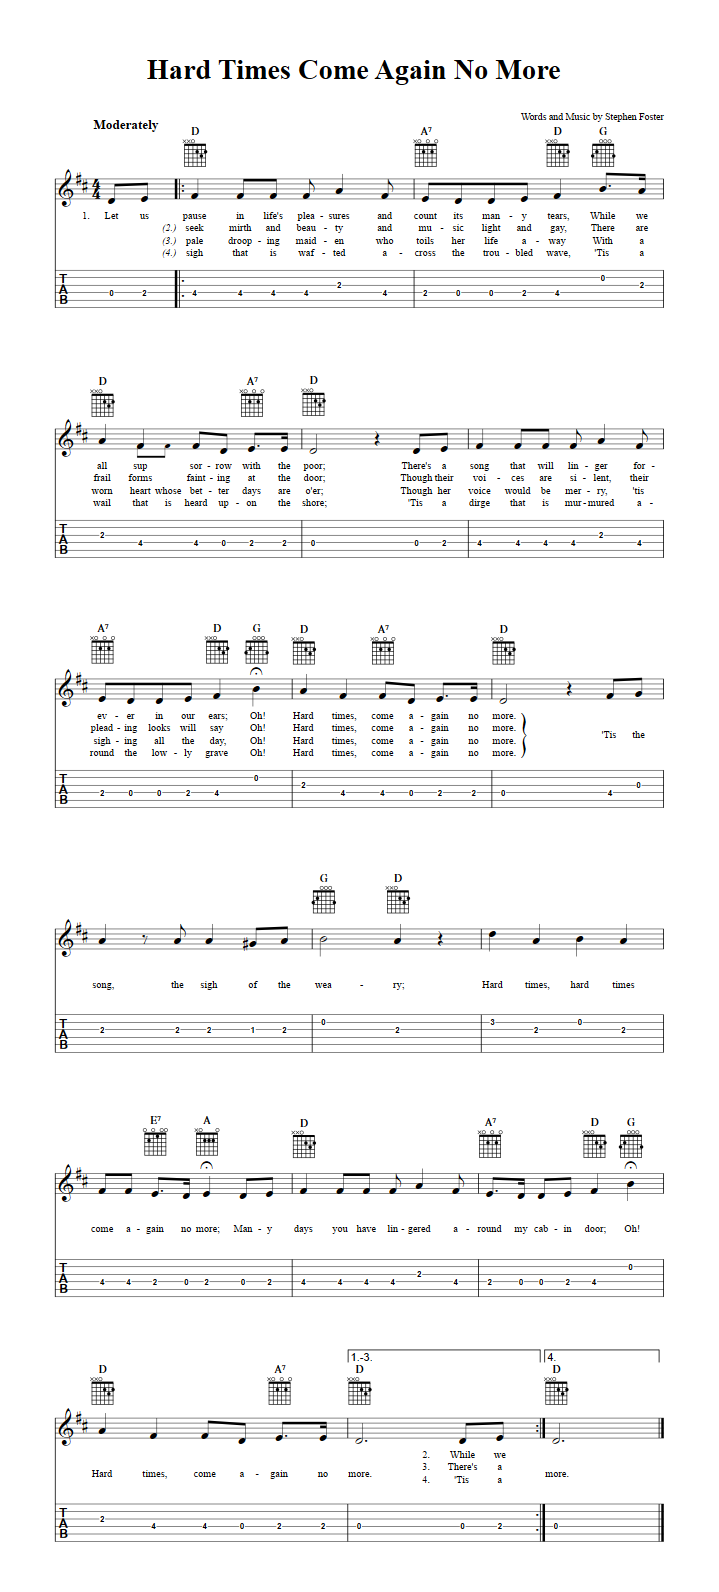 Hard Times Come Again No More: Chords, Sheet Music, and Tab for Guitar ...